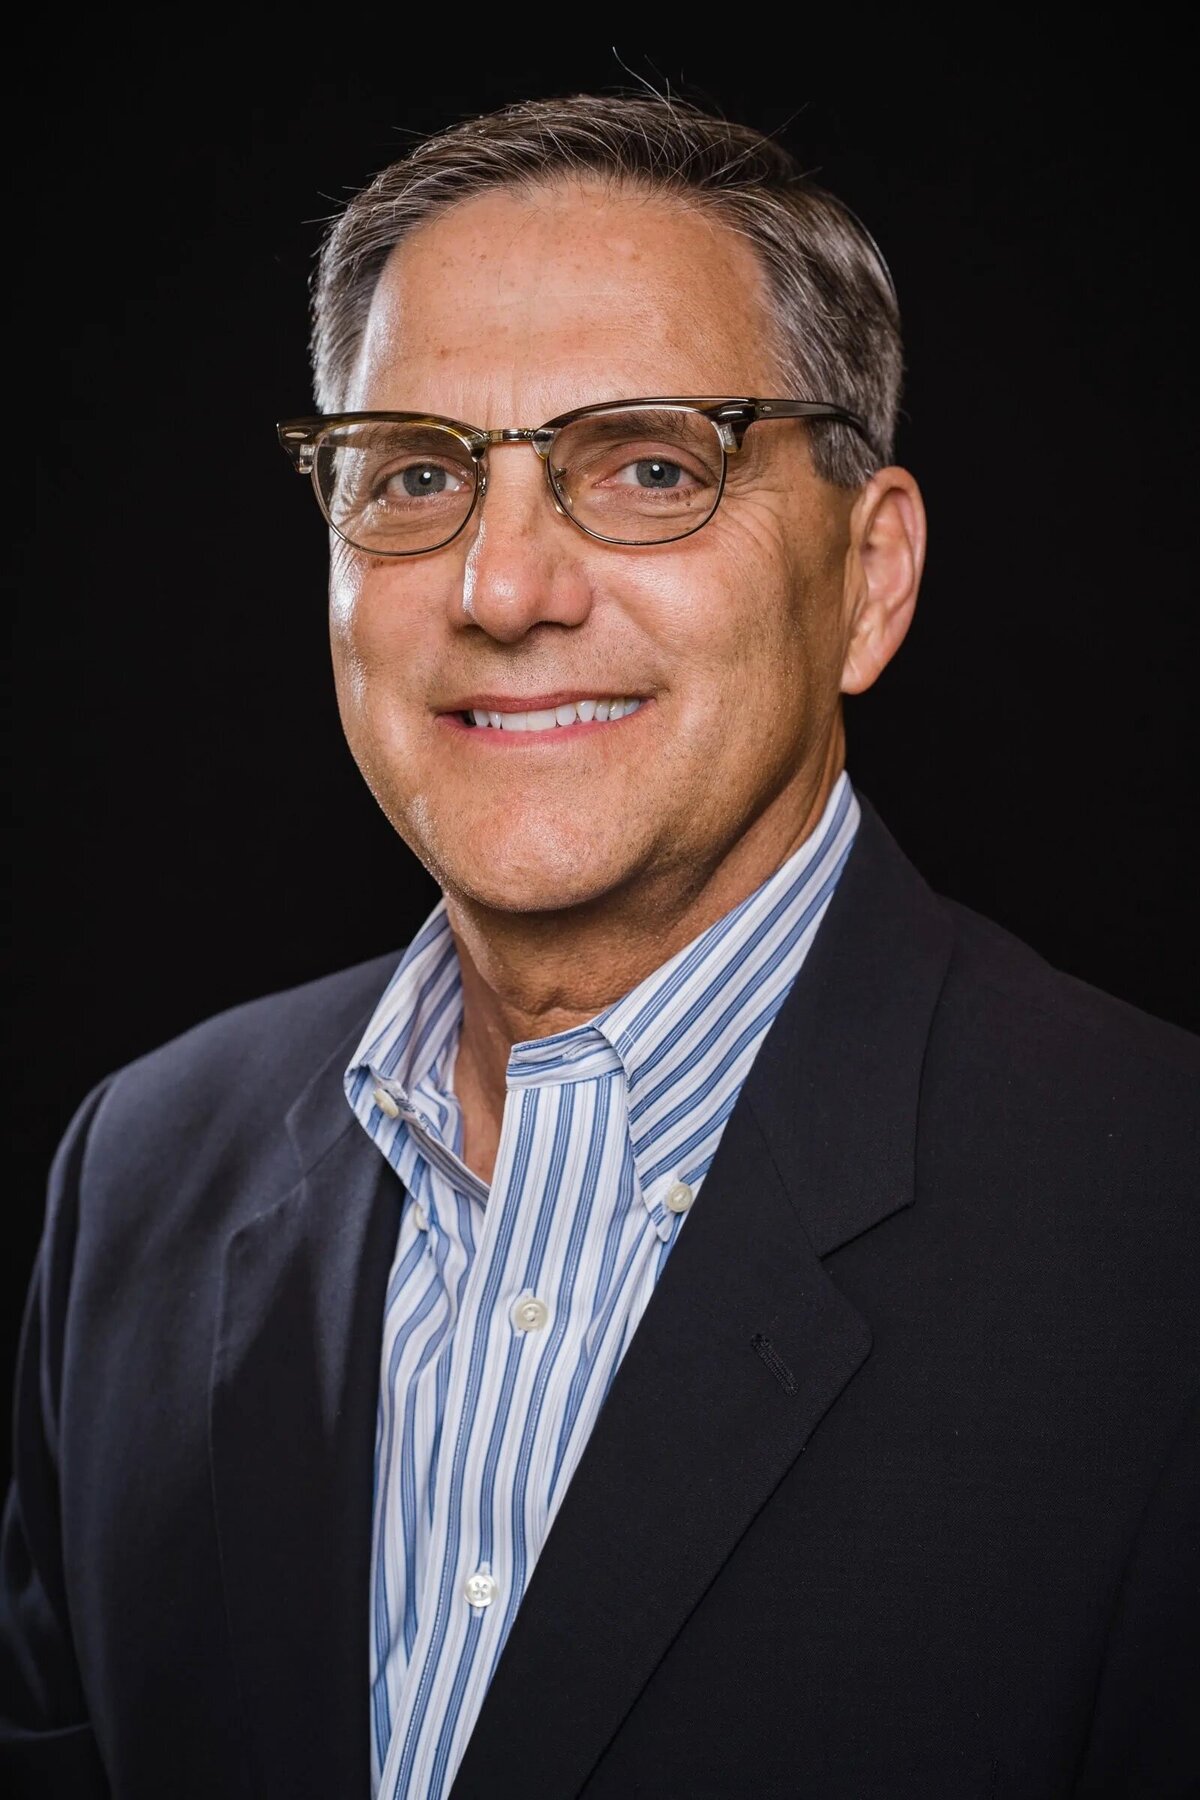 A man in a suit with glasses smiling